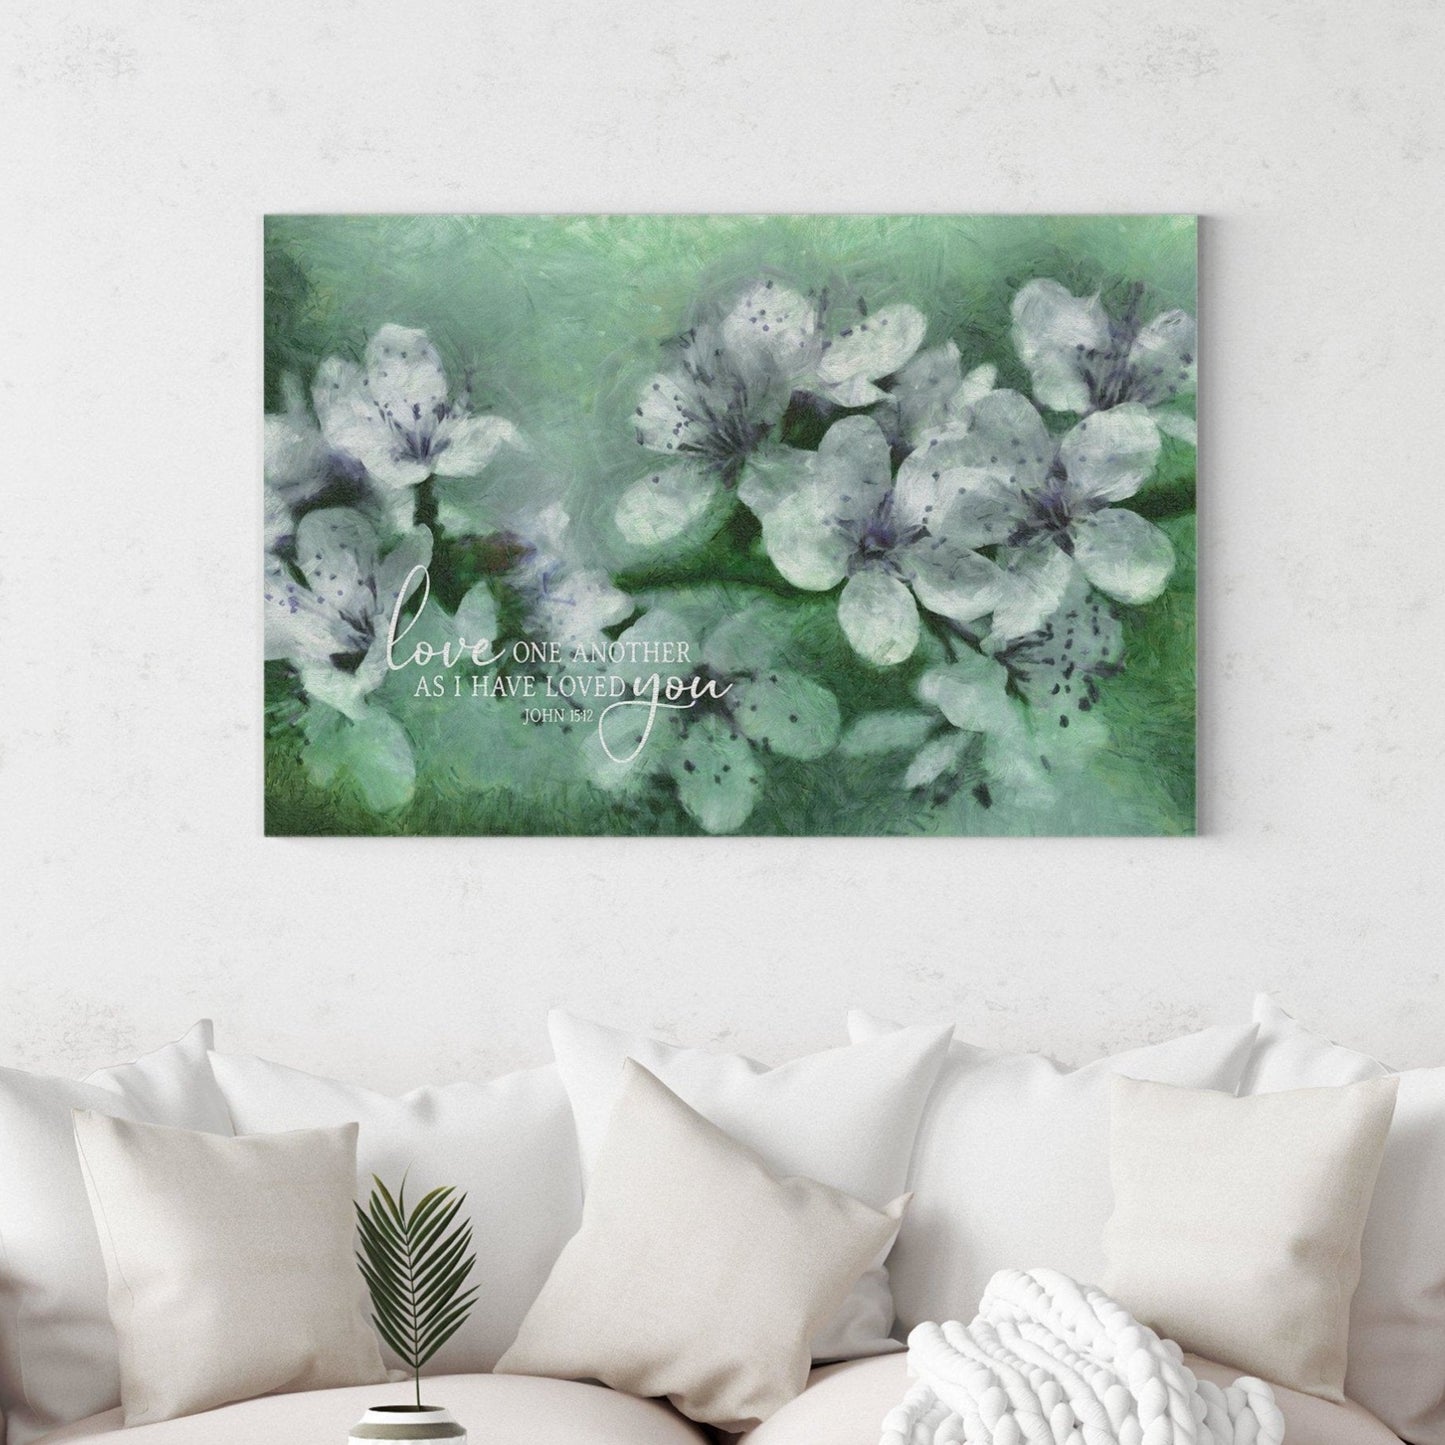 Love One Another As I Have Loved You | John 15:12 | Scripture Wall Art - Forever Written